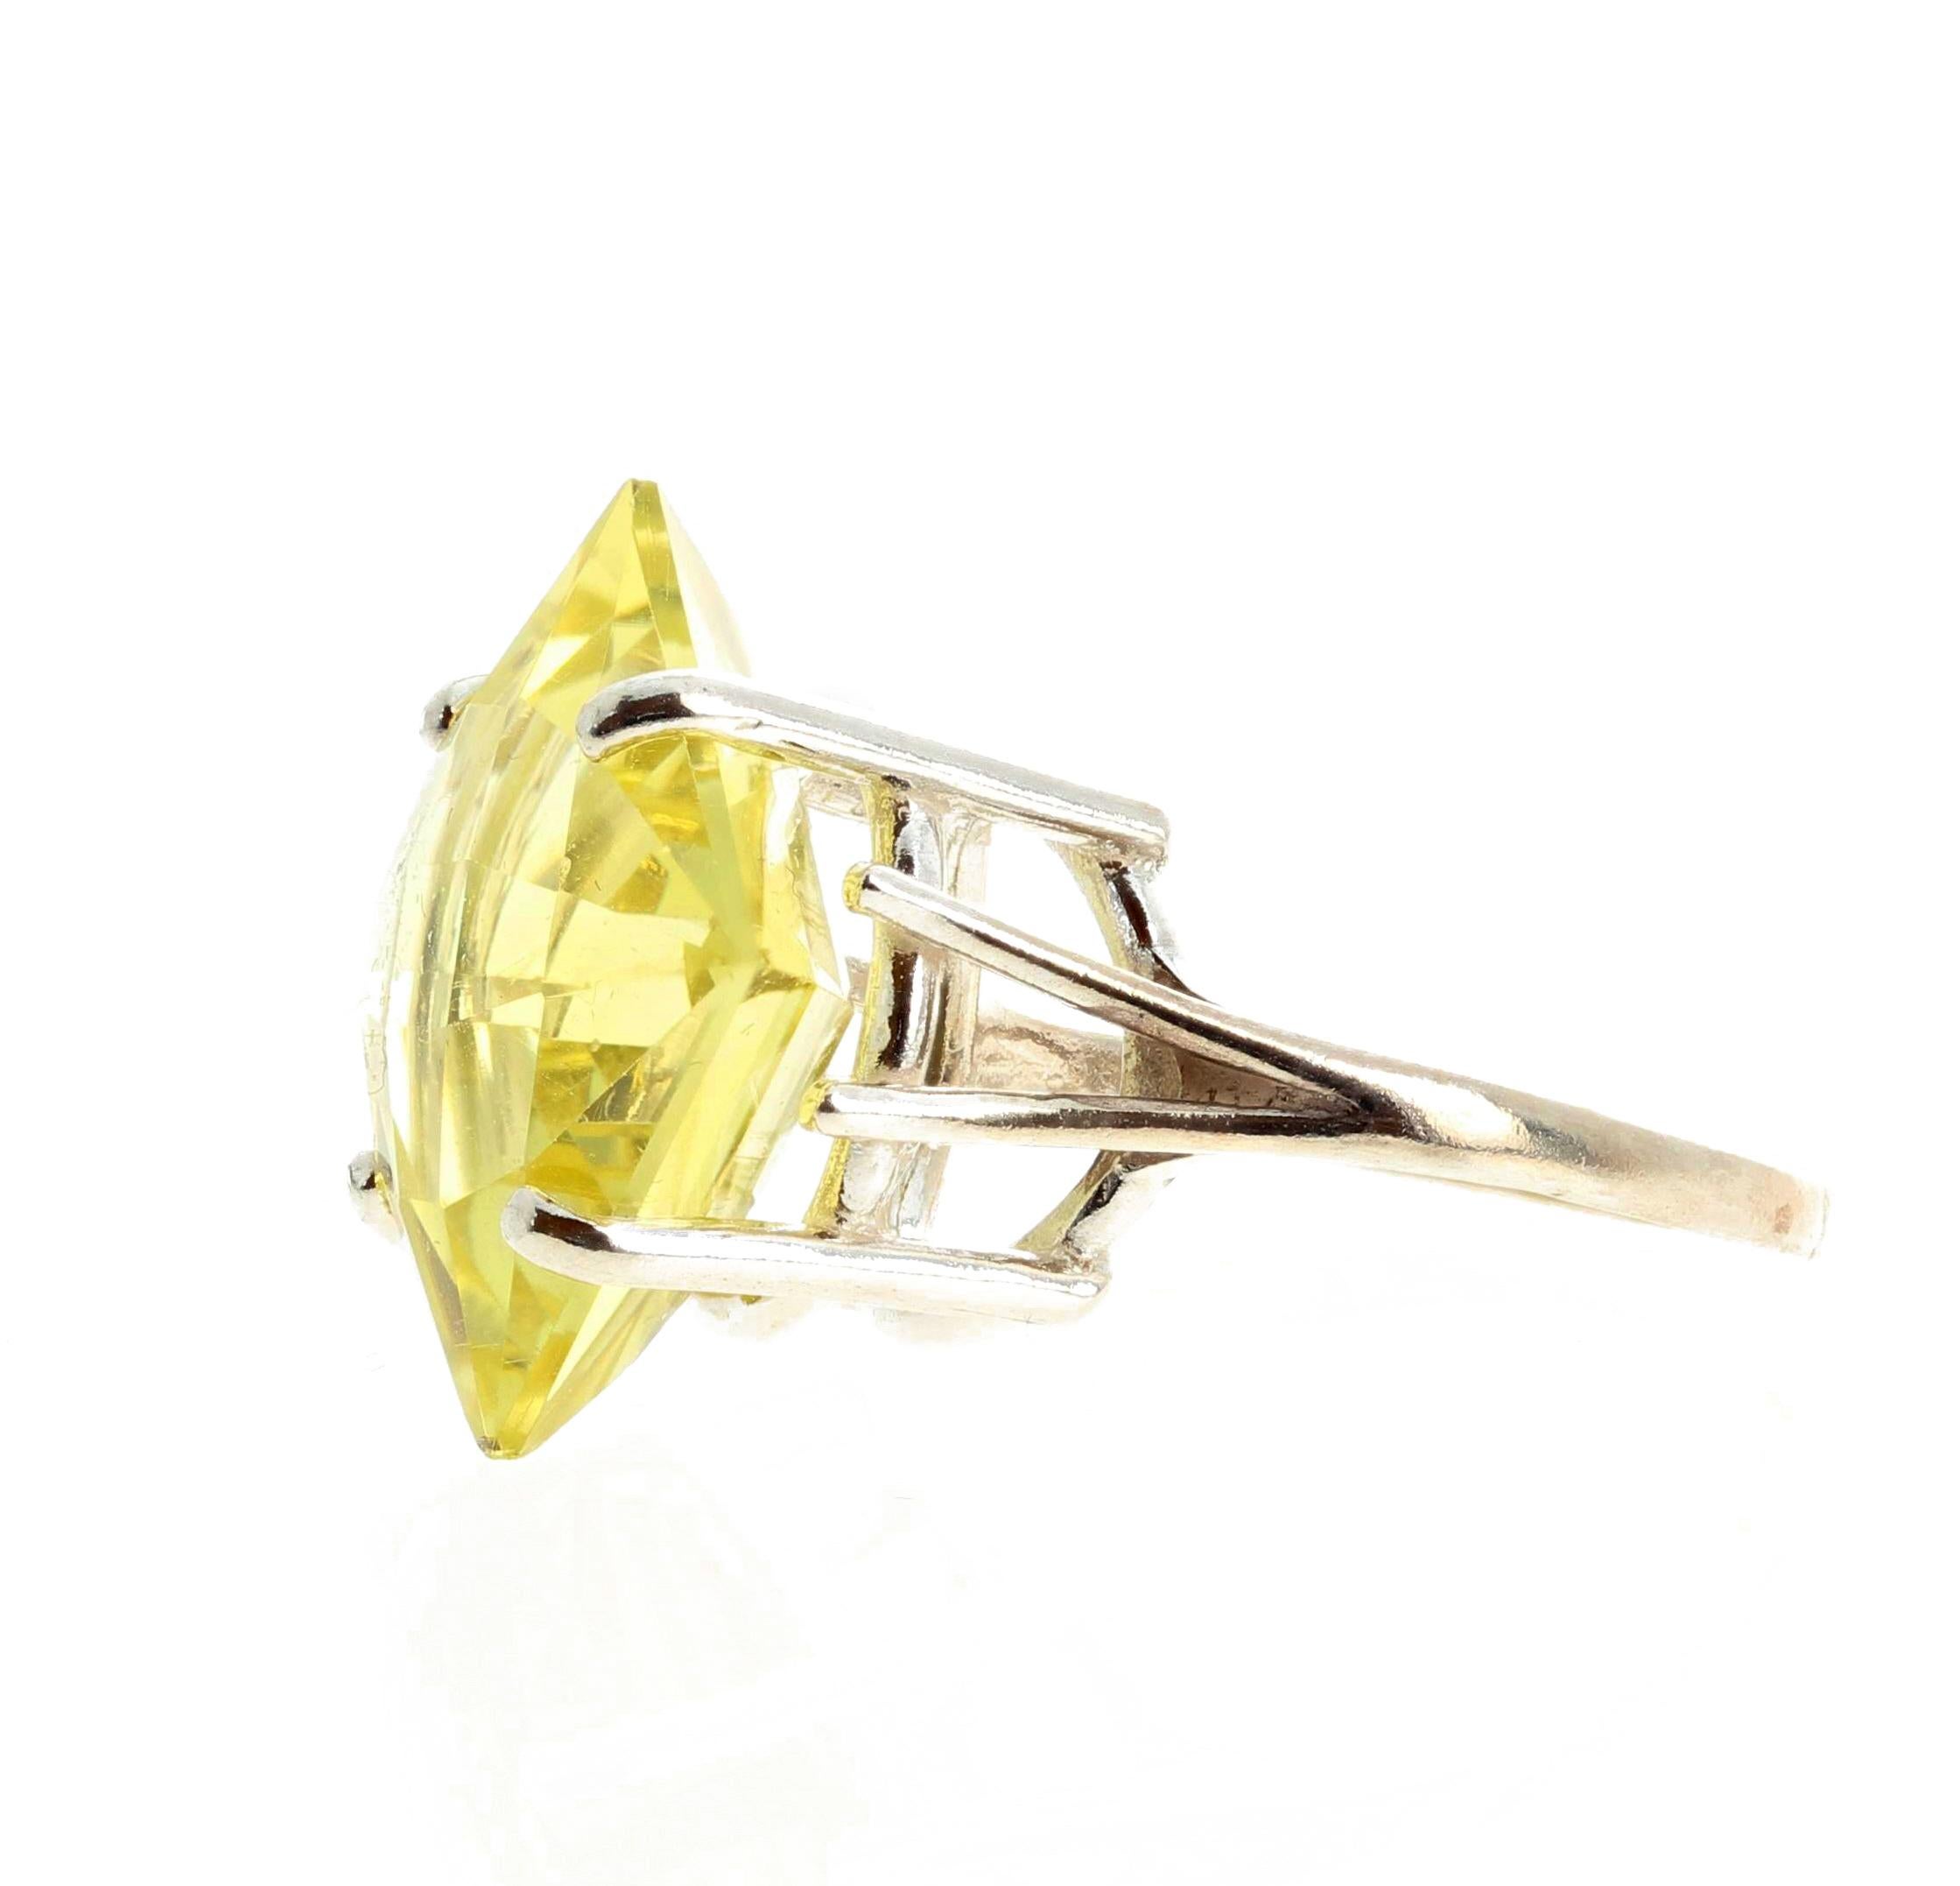 Brilliantly glittering  12 carat unique checkerboard gem cut Lemon Quartz (15mm x 15mm) set in a sterling silver ring size 7 (sizable for free).   